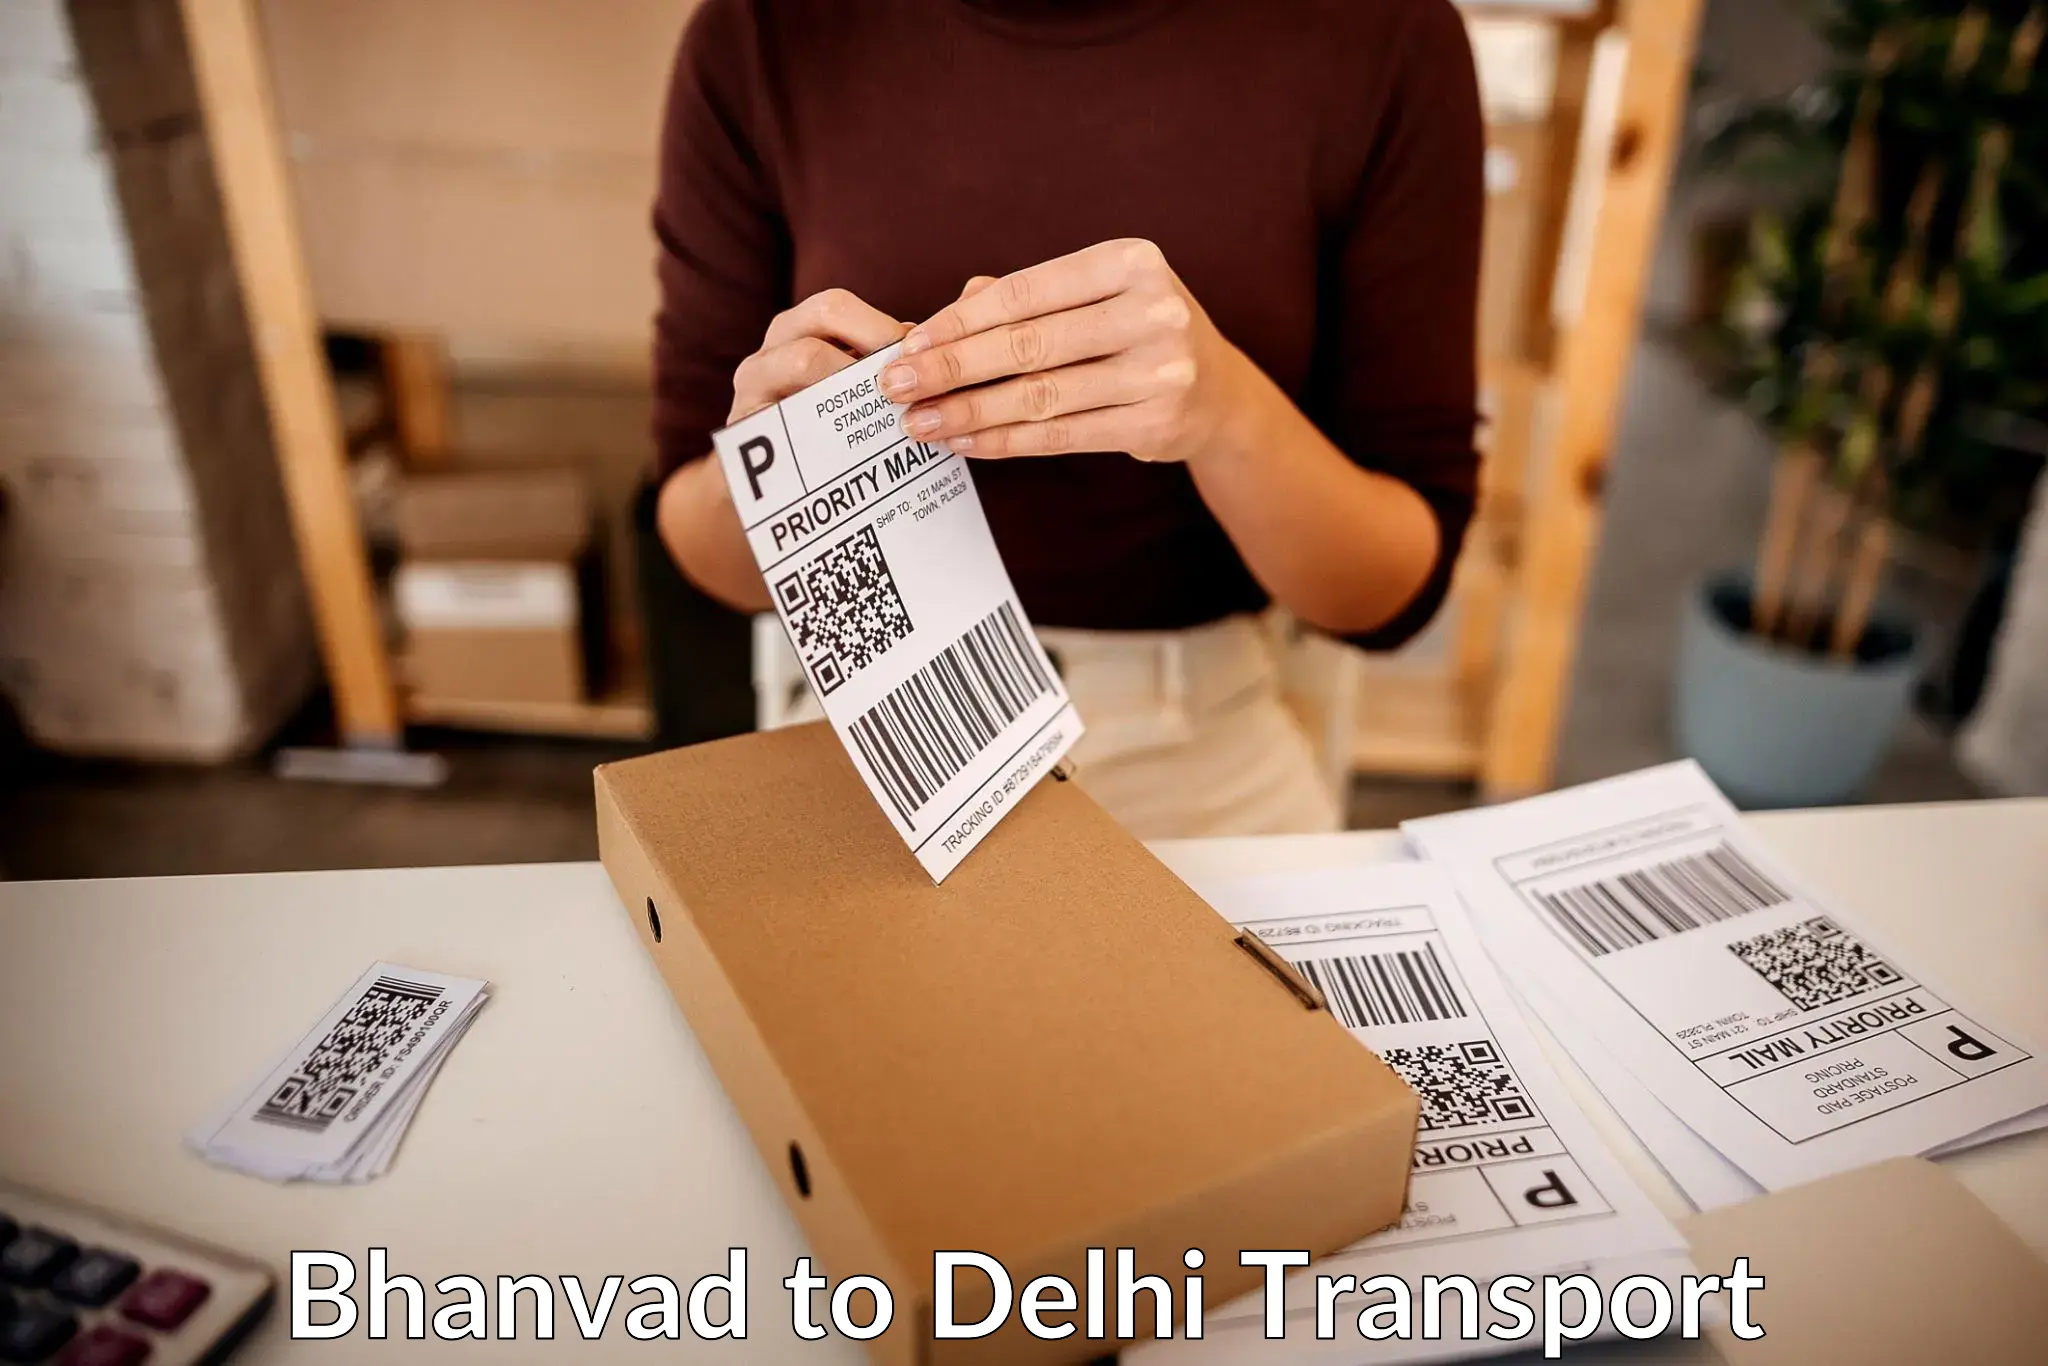 Two wheeler parcel service Bhanvad to NCR